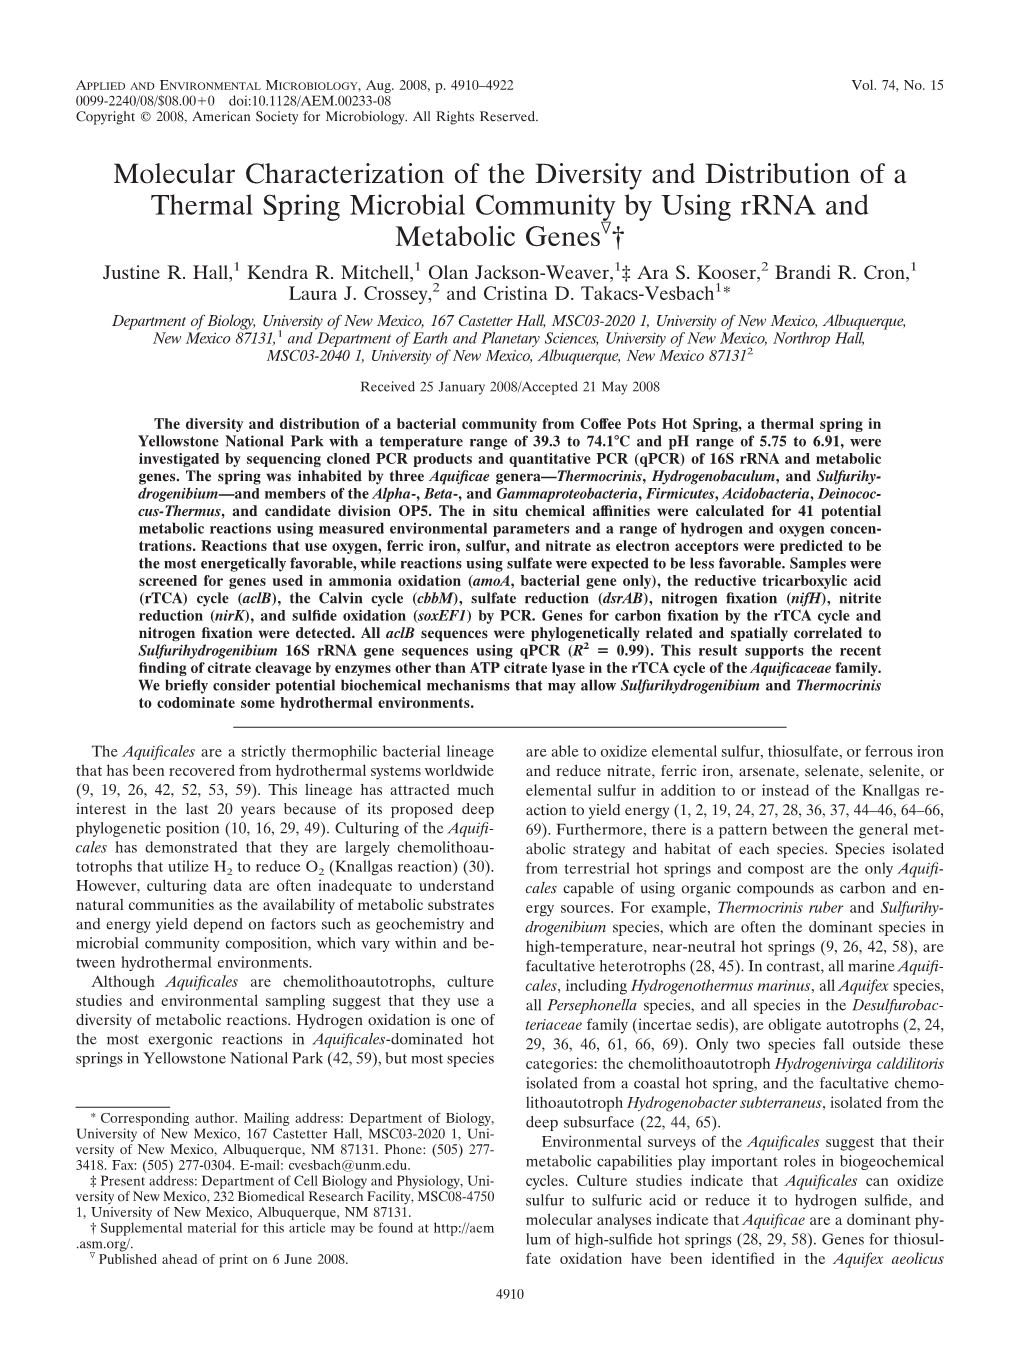 Molecular Characterization of the Diversity and Distribution of a Thermal Spring Microbial Community by Using Rrna and Metabolic Genesᰔ† Justine R